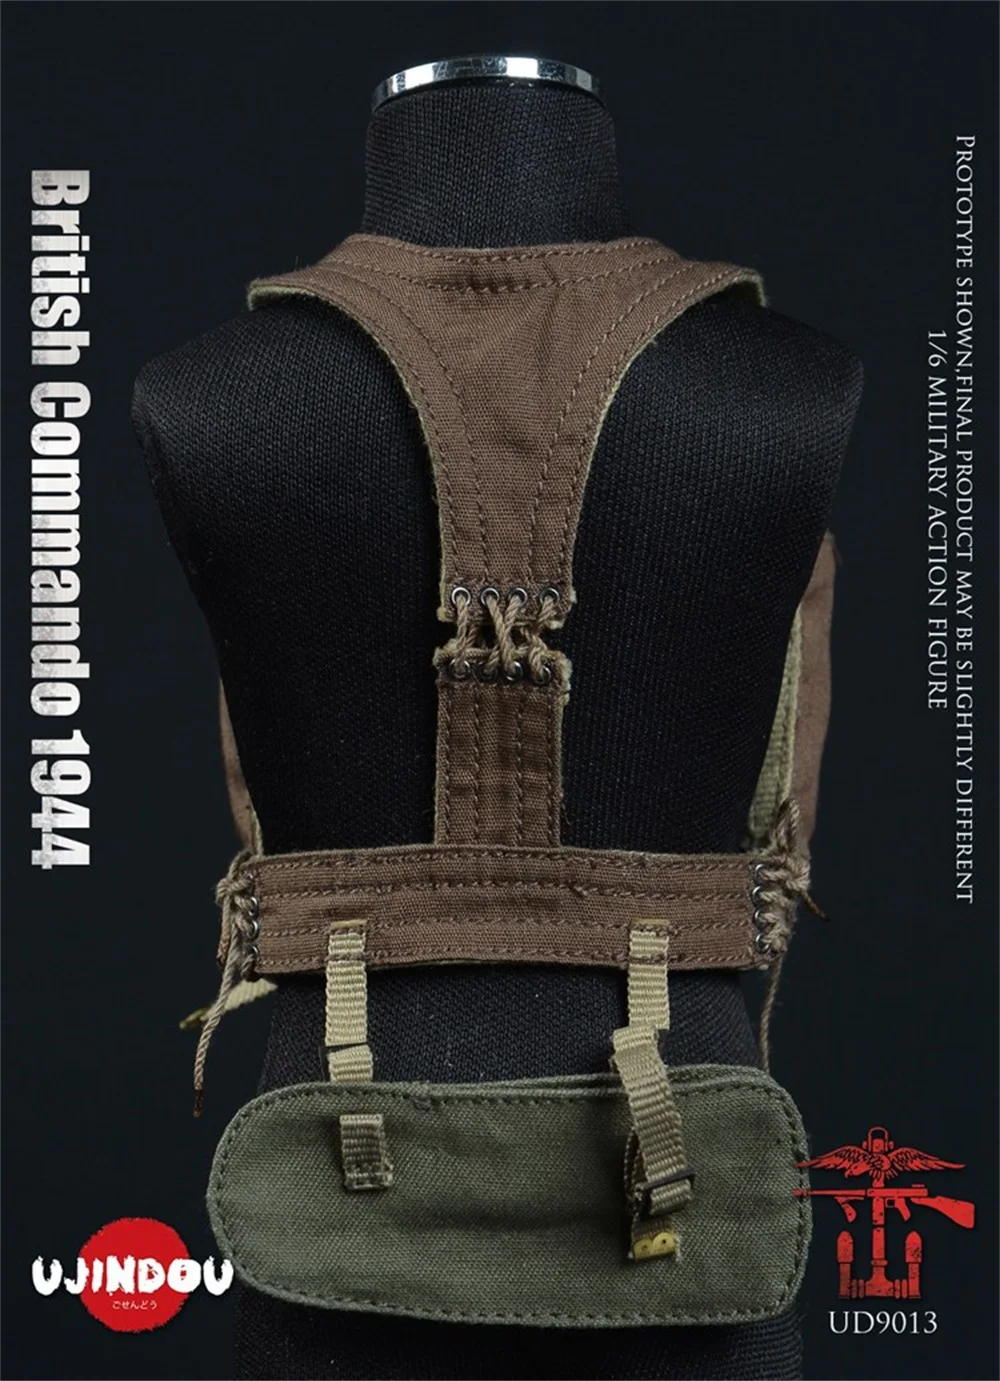 1/6 UJINDOU UD9013 WWII Series The British Commando Of Year 1944 Camo Hang Chest Vest White Sweater Accessories Fit 12" Figure